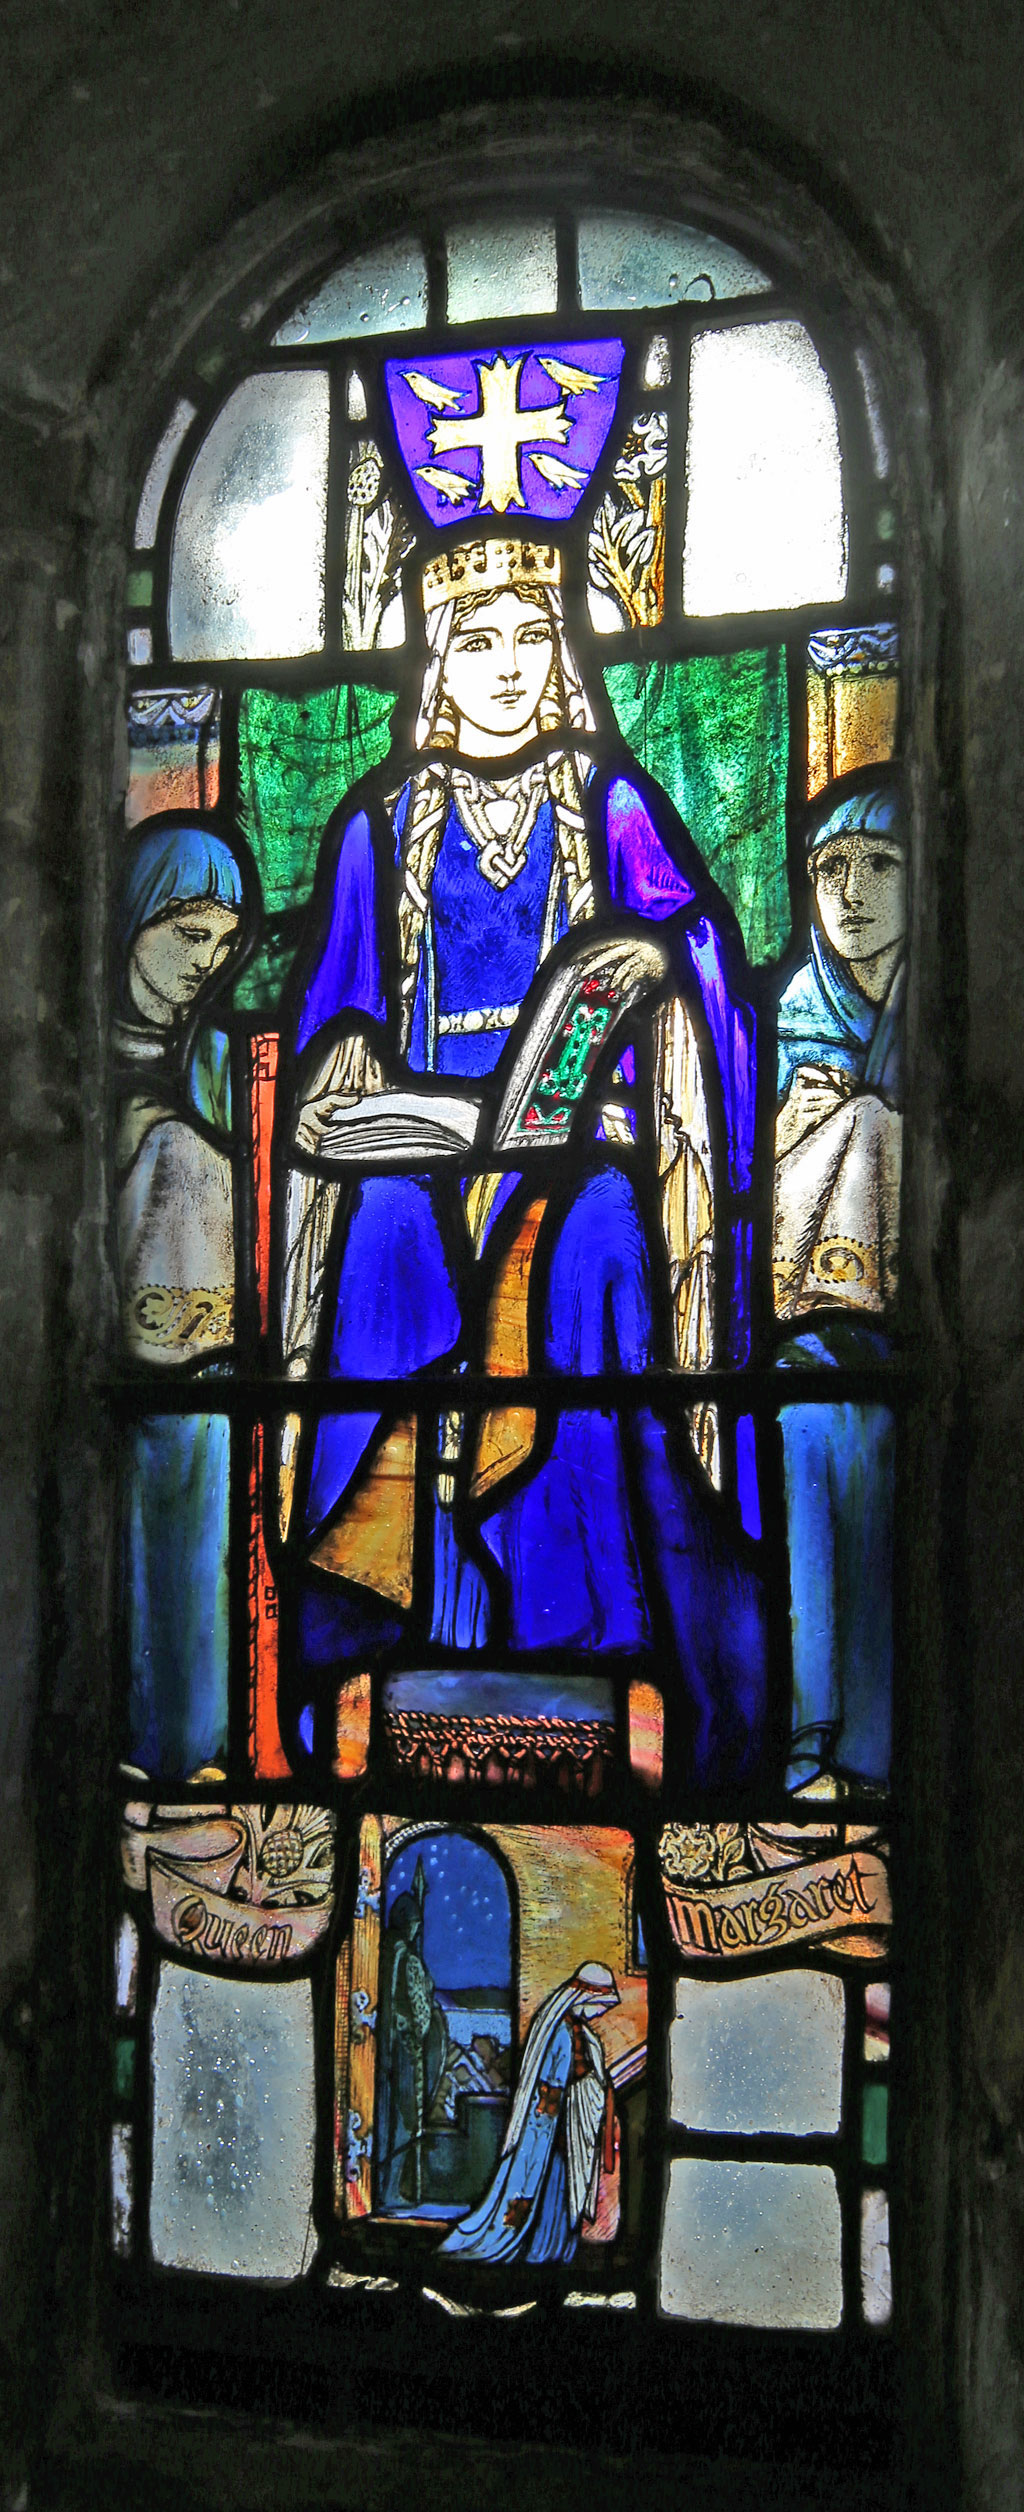 A small stained glass window in St Margaret's Chapel, the oldest building of Edinburgh Castle